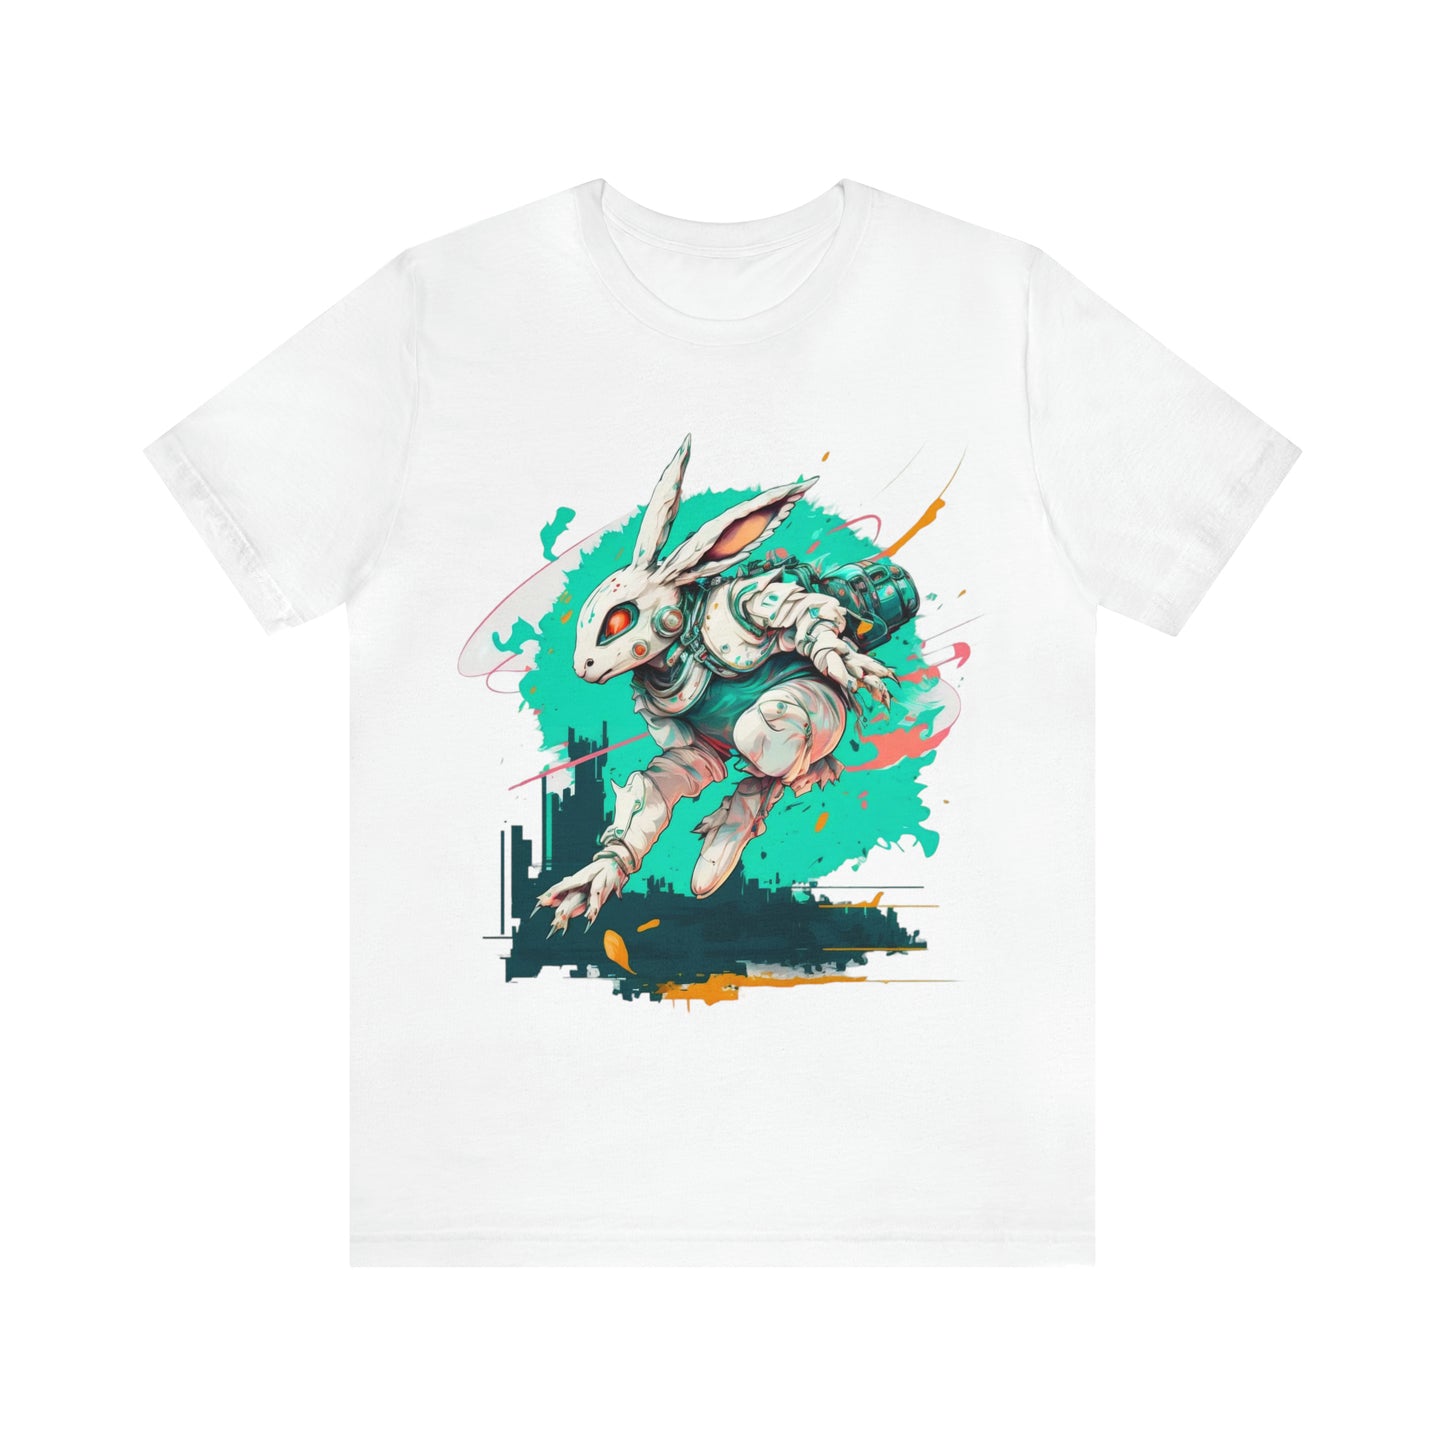 Jumping Tot (White Outfit) - Unisex Jersey Short Sleeve Tee